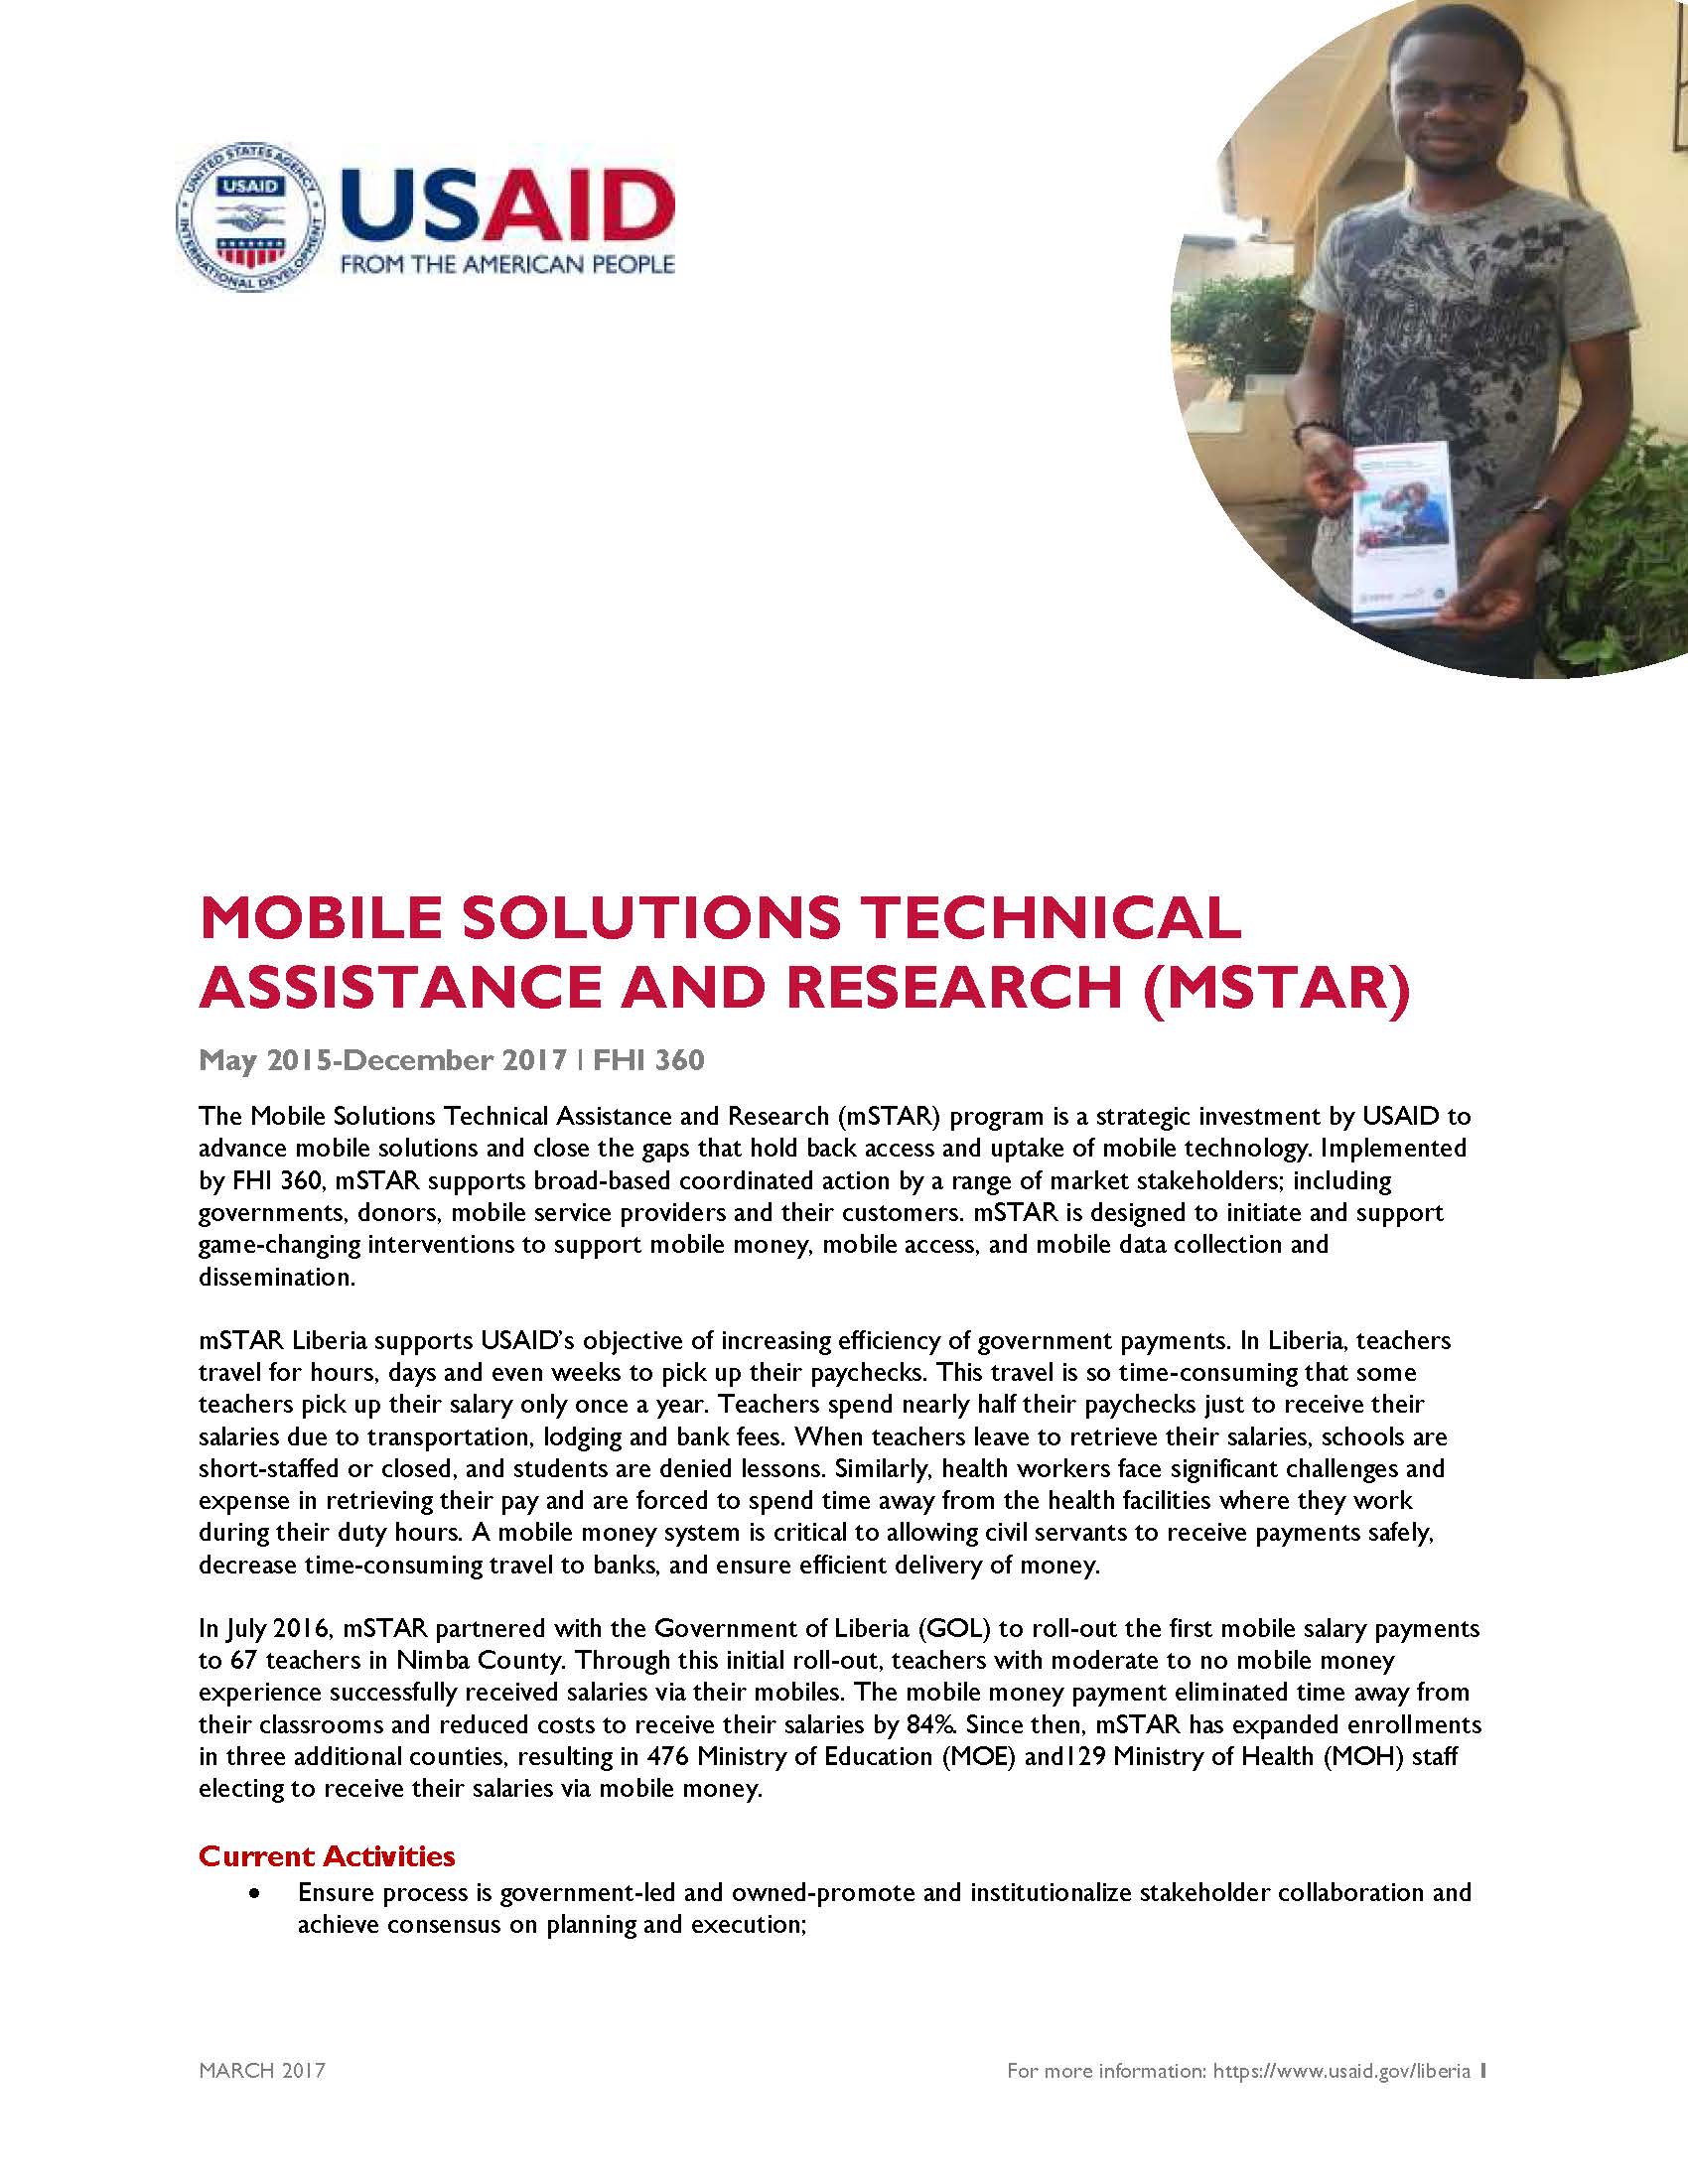 Mobile Solutions Technical Assistance and Research Fact Sheet 